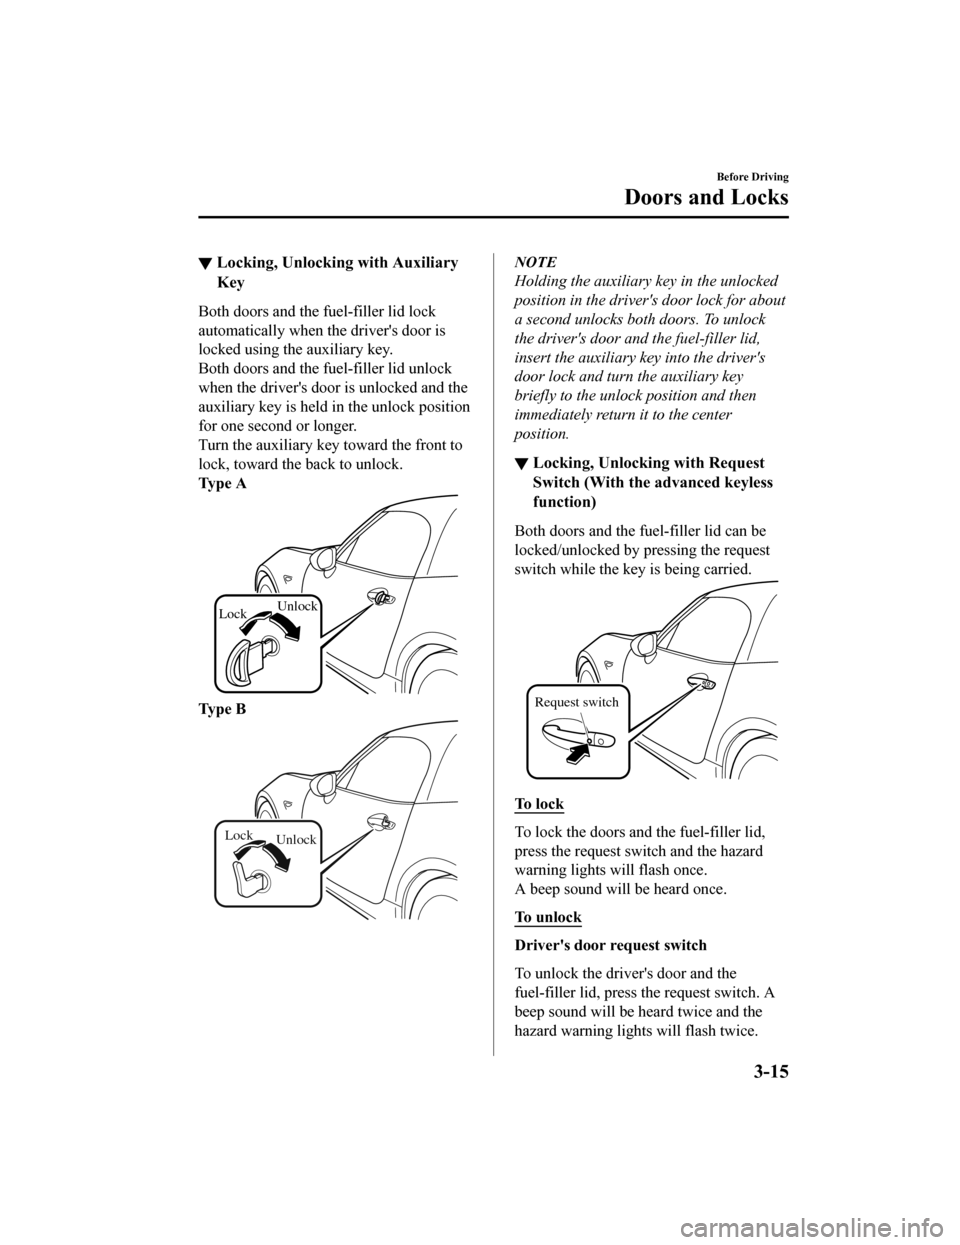 MAZDA MODEL MX-5 2020  Owners Manual (in English) ▼Locking, Unlocking with Auxiliary
Key
Both doors and the fuel-filler lid lock
automatically when the drivers door is
locked using the  auxiliary key.
Both doors and the fuel-filler lid unlock
when